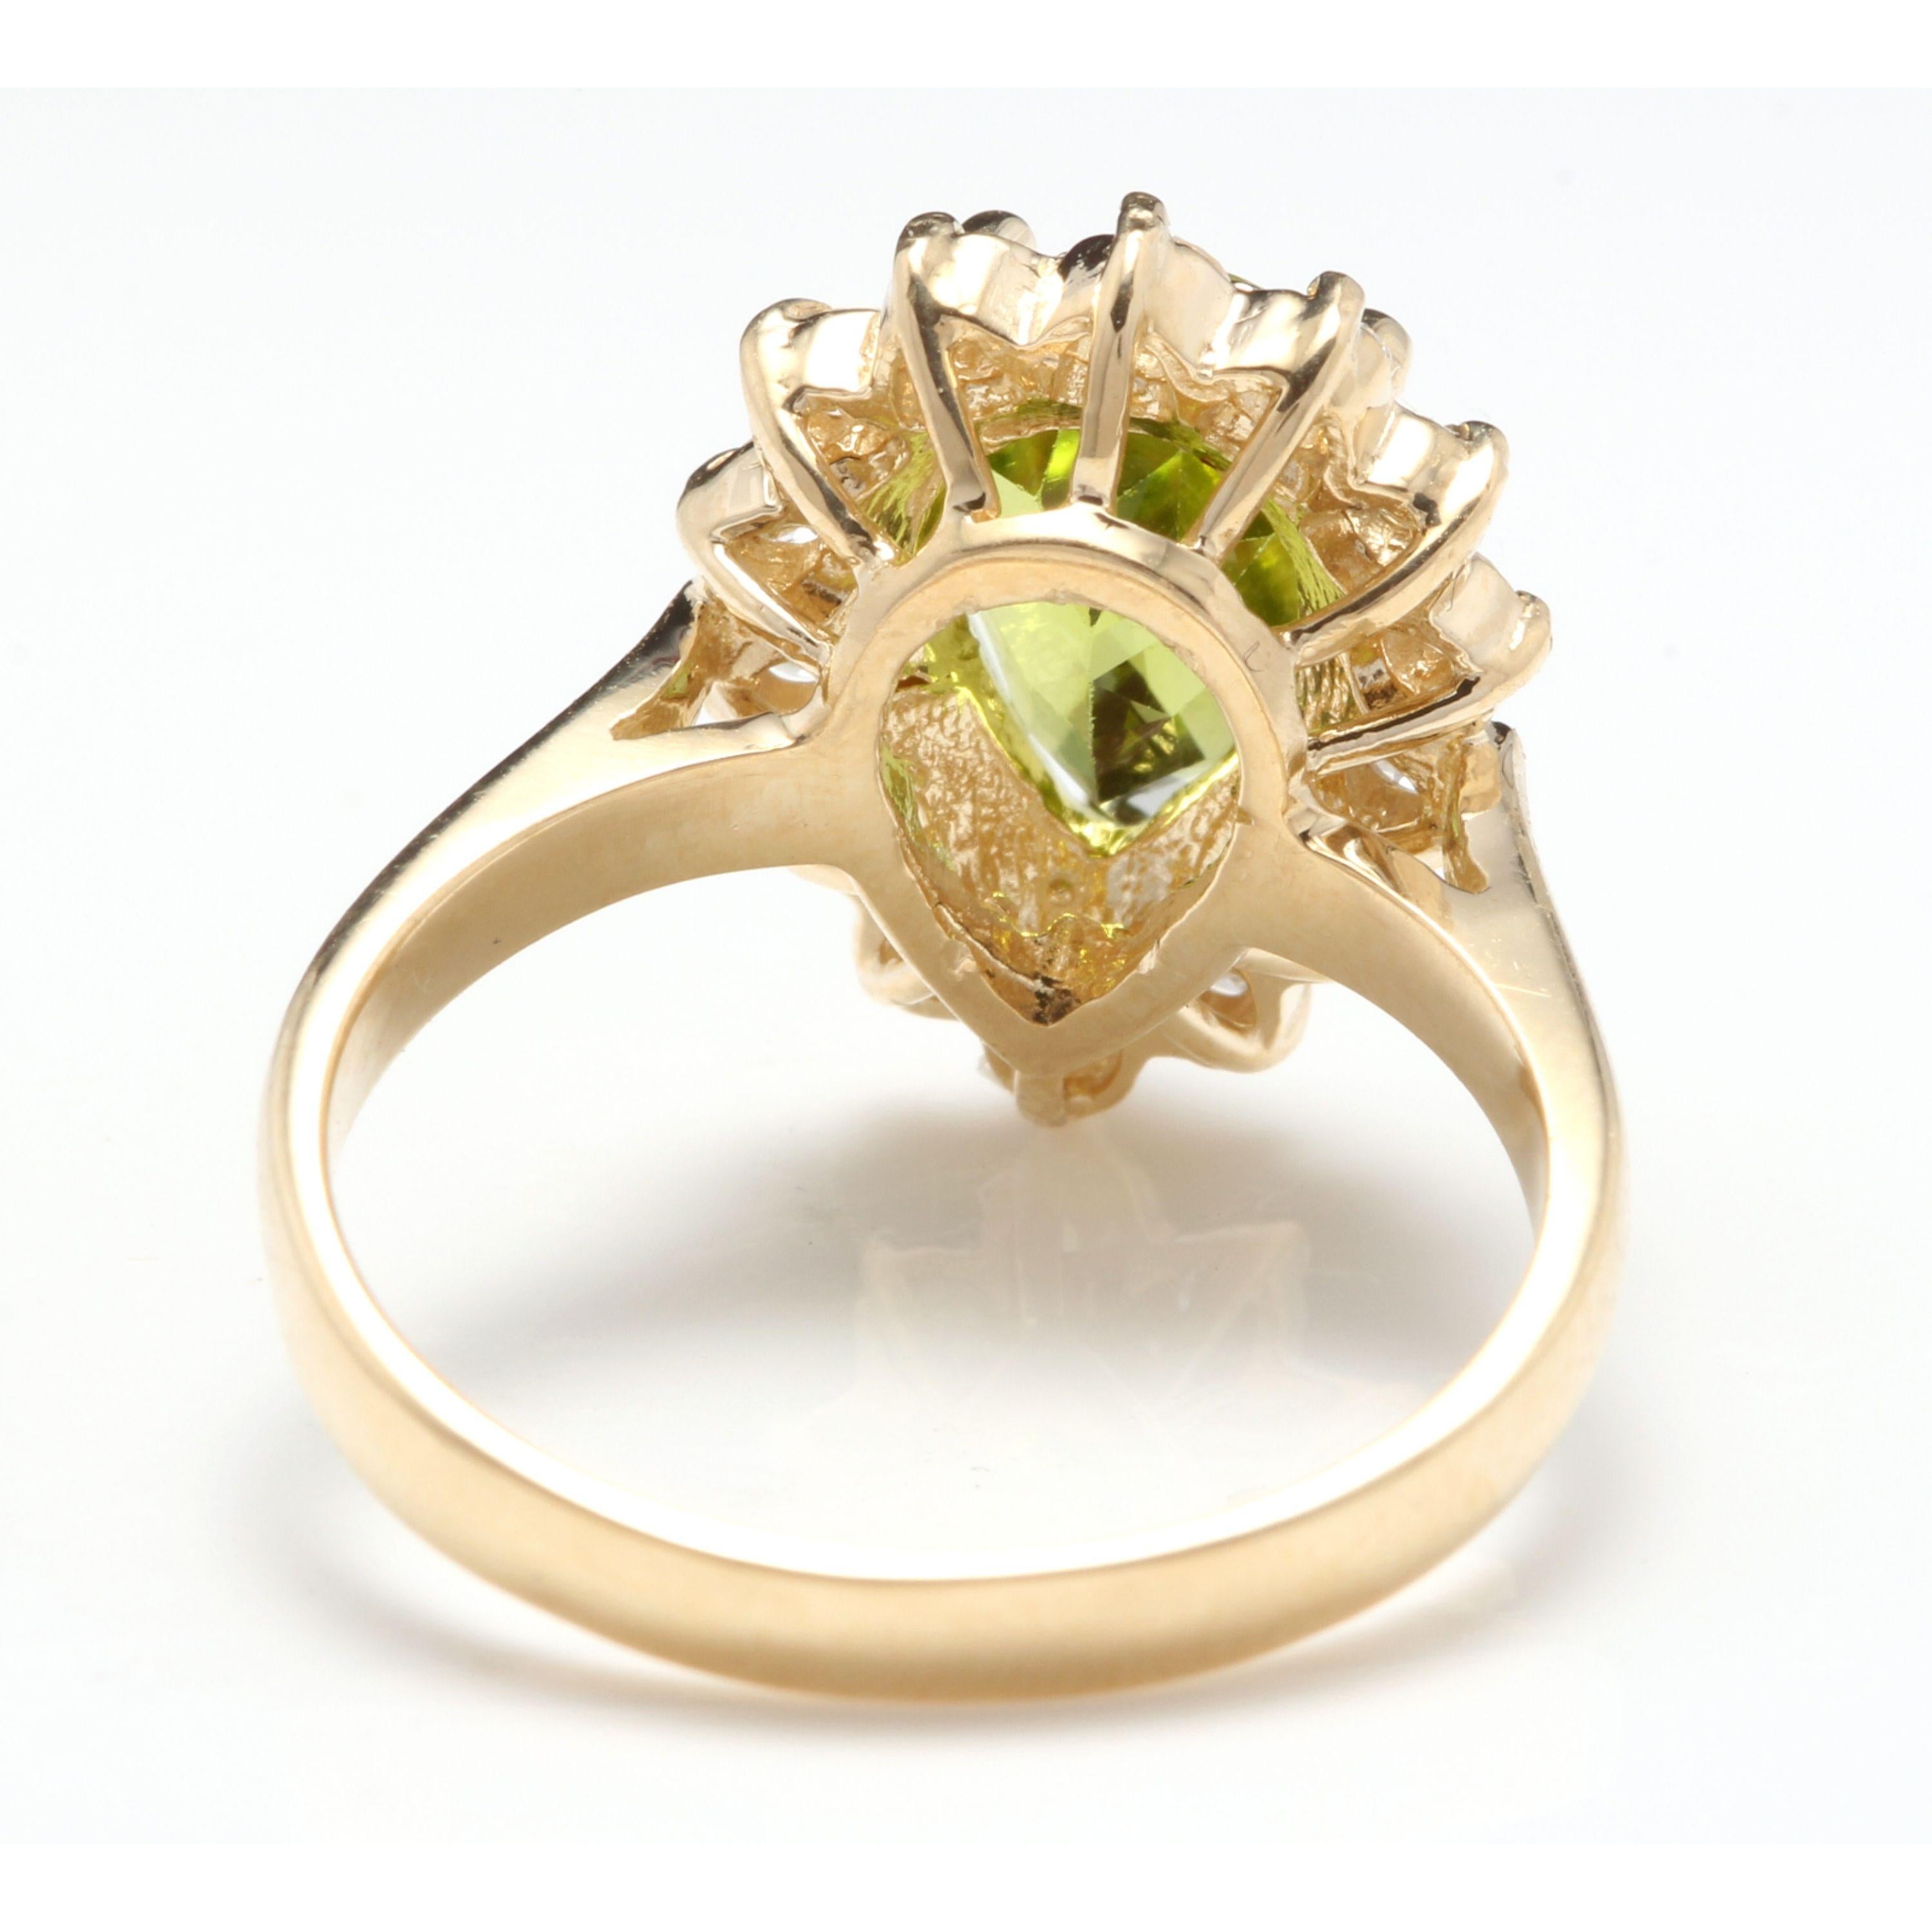 Mixed Cut 3.20 Ct Natural Very Nice Looking Peridot and Diamond 14K Solid Yellow Gold Ring For Sale